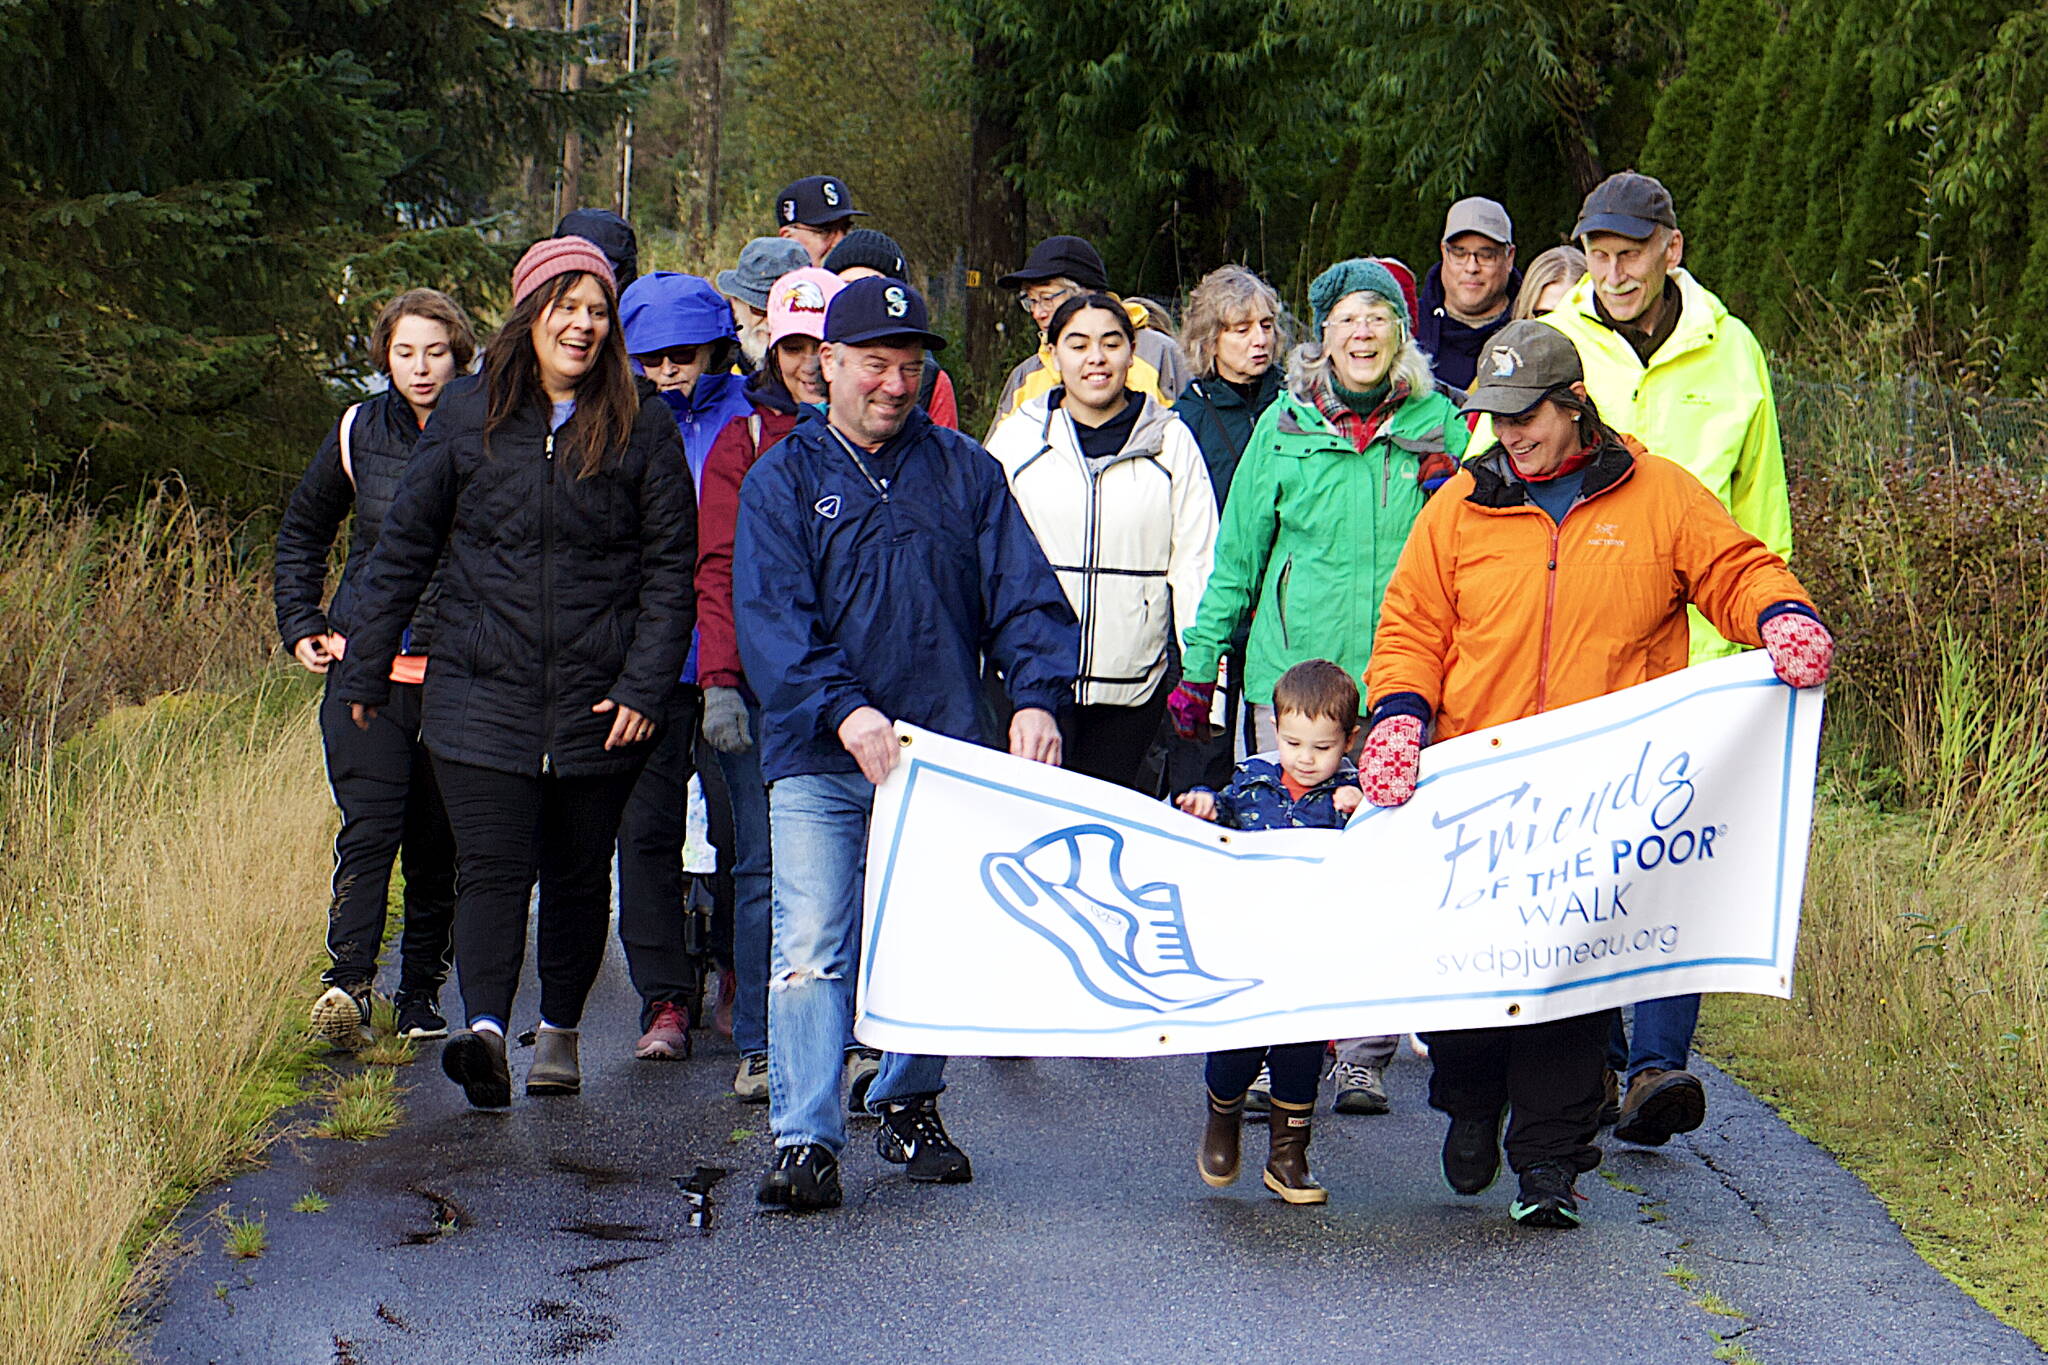 Officials, volunteers and donors affiliated with St. Vincent de Paul Juneau walk down a path alongside Egan Drive on Saturday morning as part of a Friends of the Poor Run/Walk to raise money for the facility and its programs. (Mark Sabbatini / Juneau Empire)